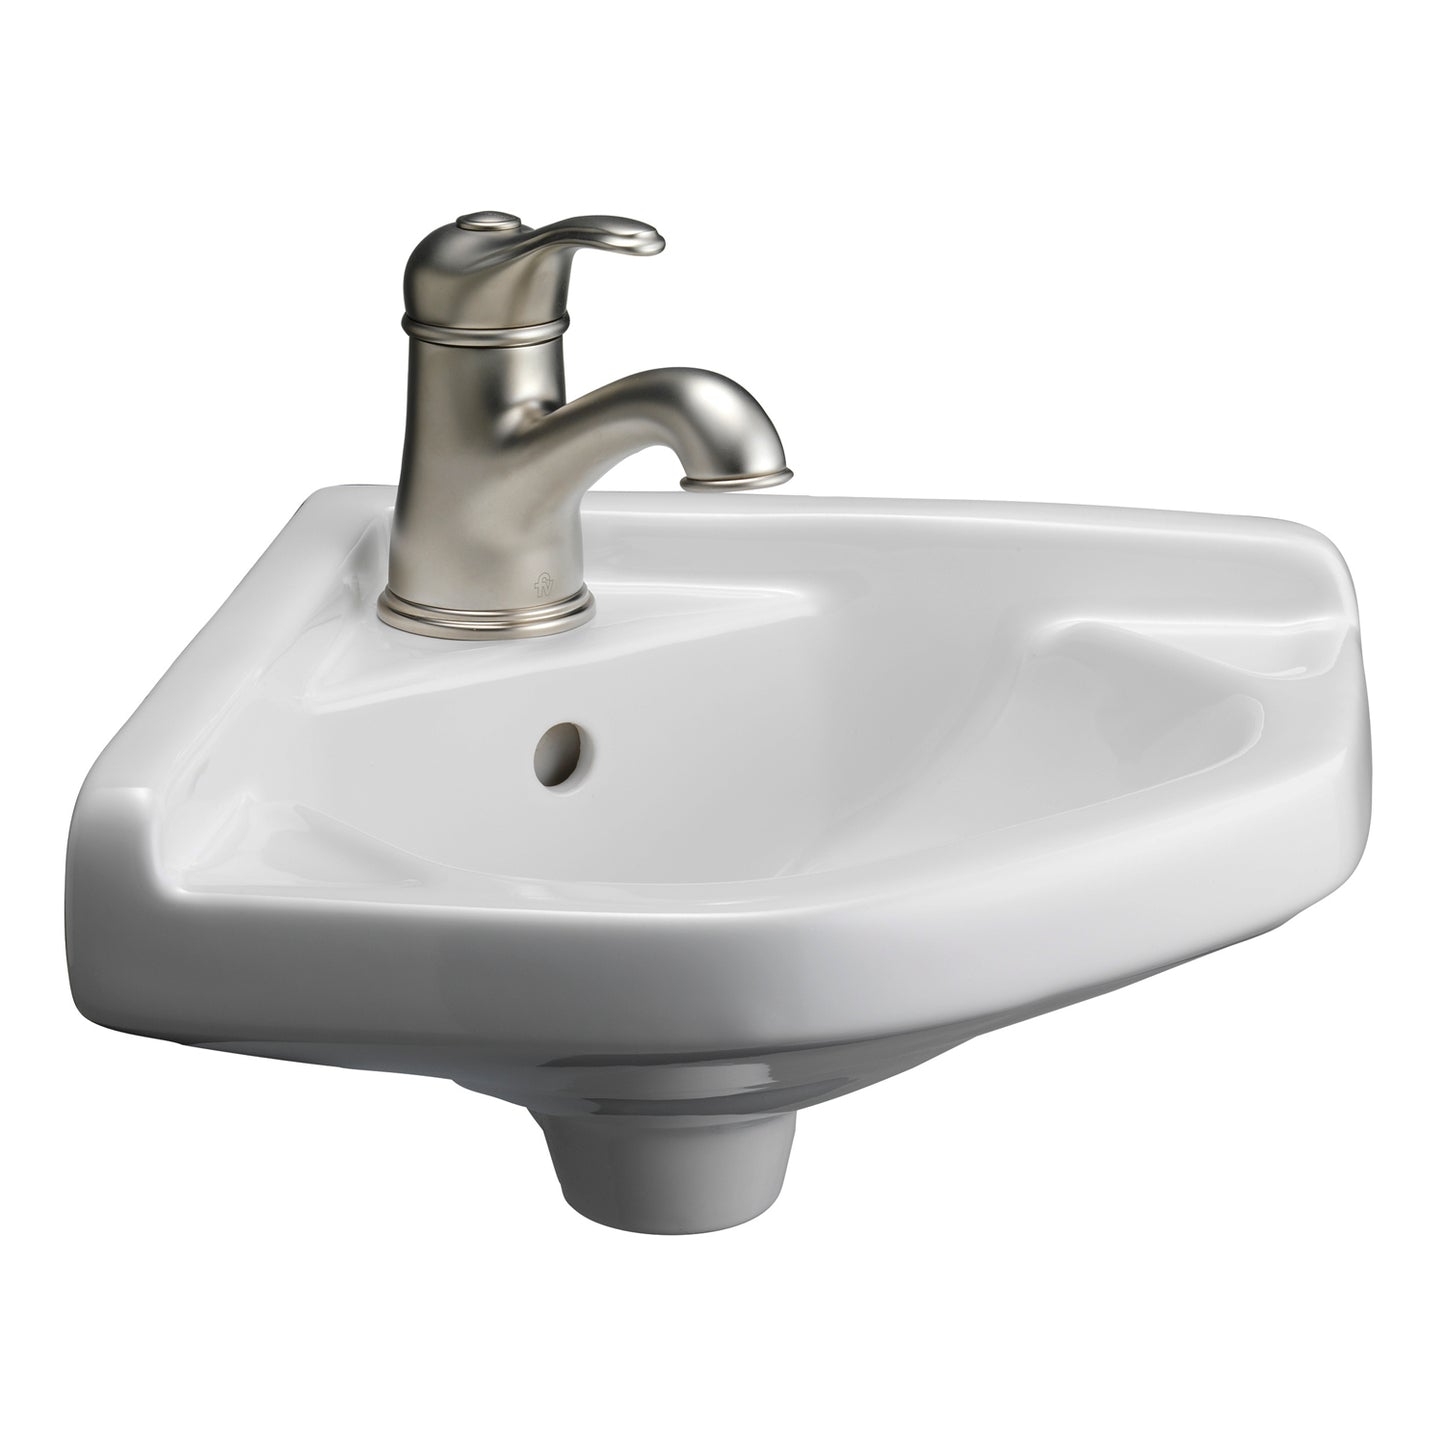 Corner Wall Hung Bathroom Sink 14" in White for 1 Hole Faucet